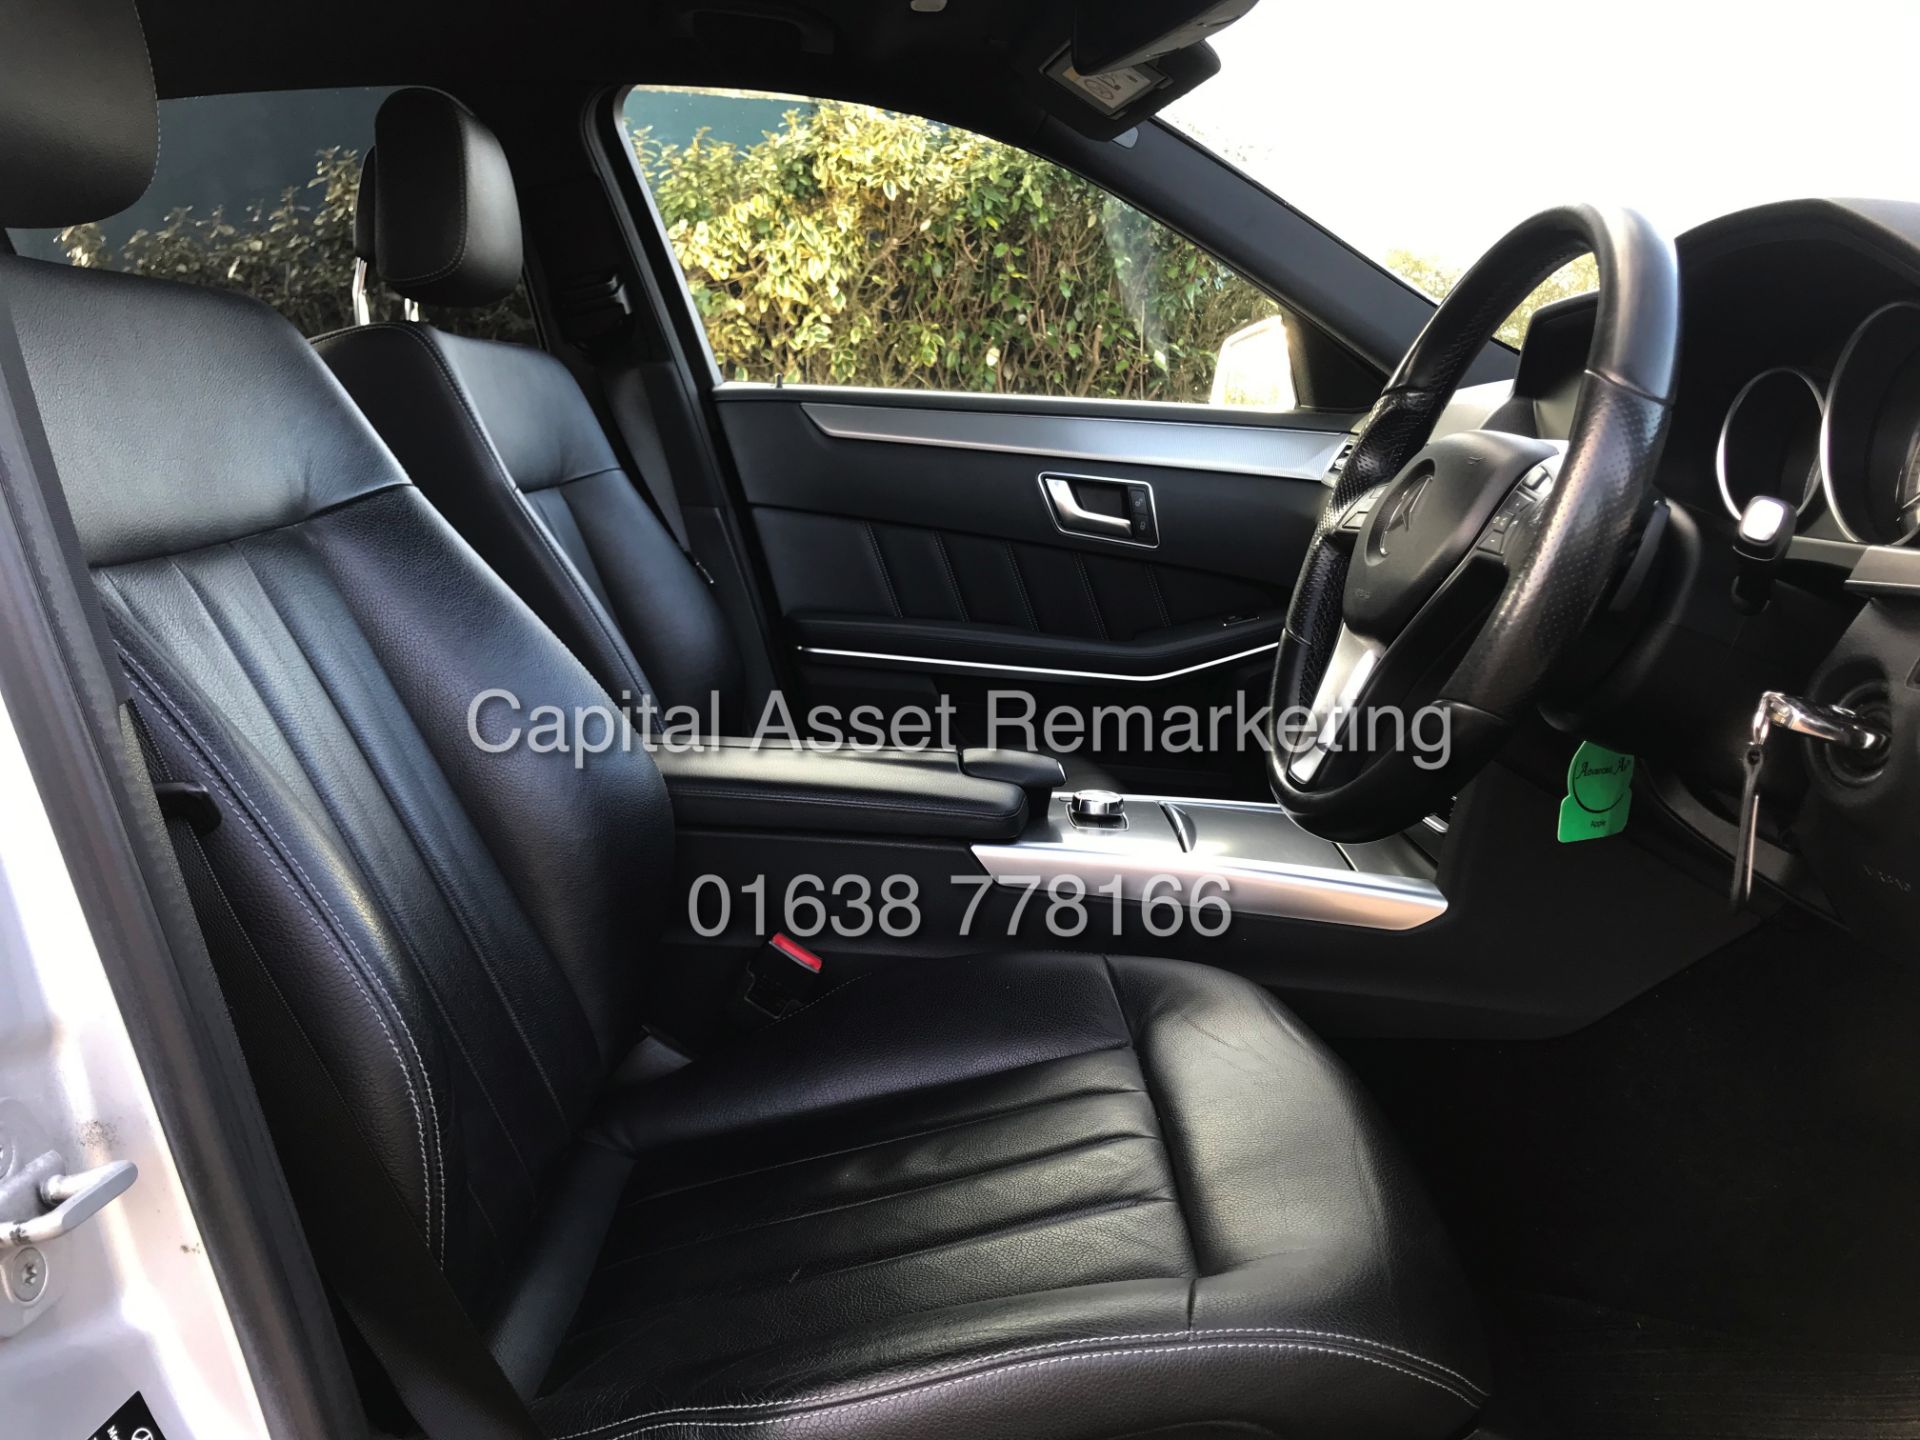 MERCEDES E220d "SPECIAL EQUIPMENT" 7G TRONIC AUTO (2015 MODEL) 1 OWNER - SAT NAV - LEATHER - Image 12 of 26